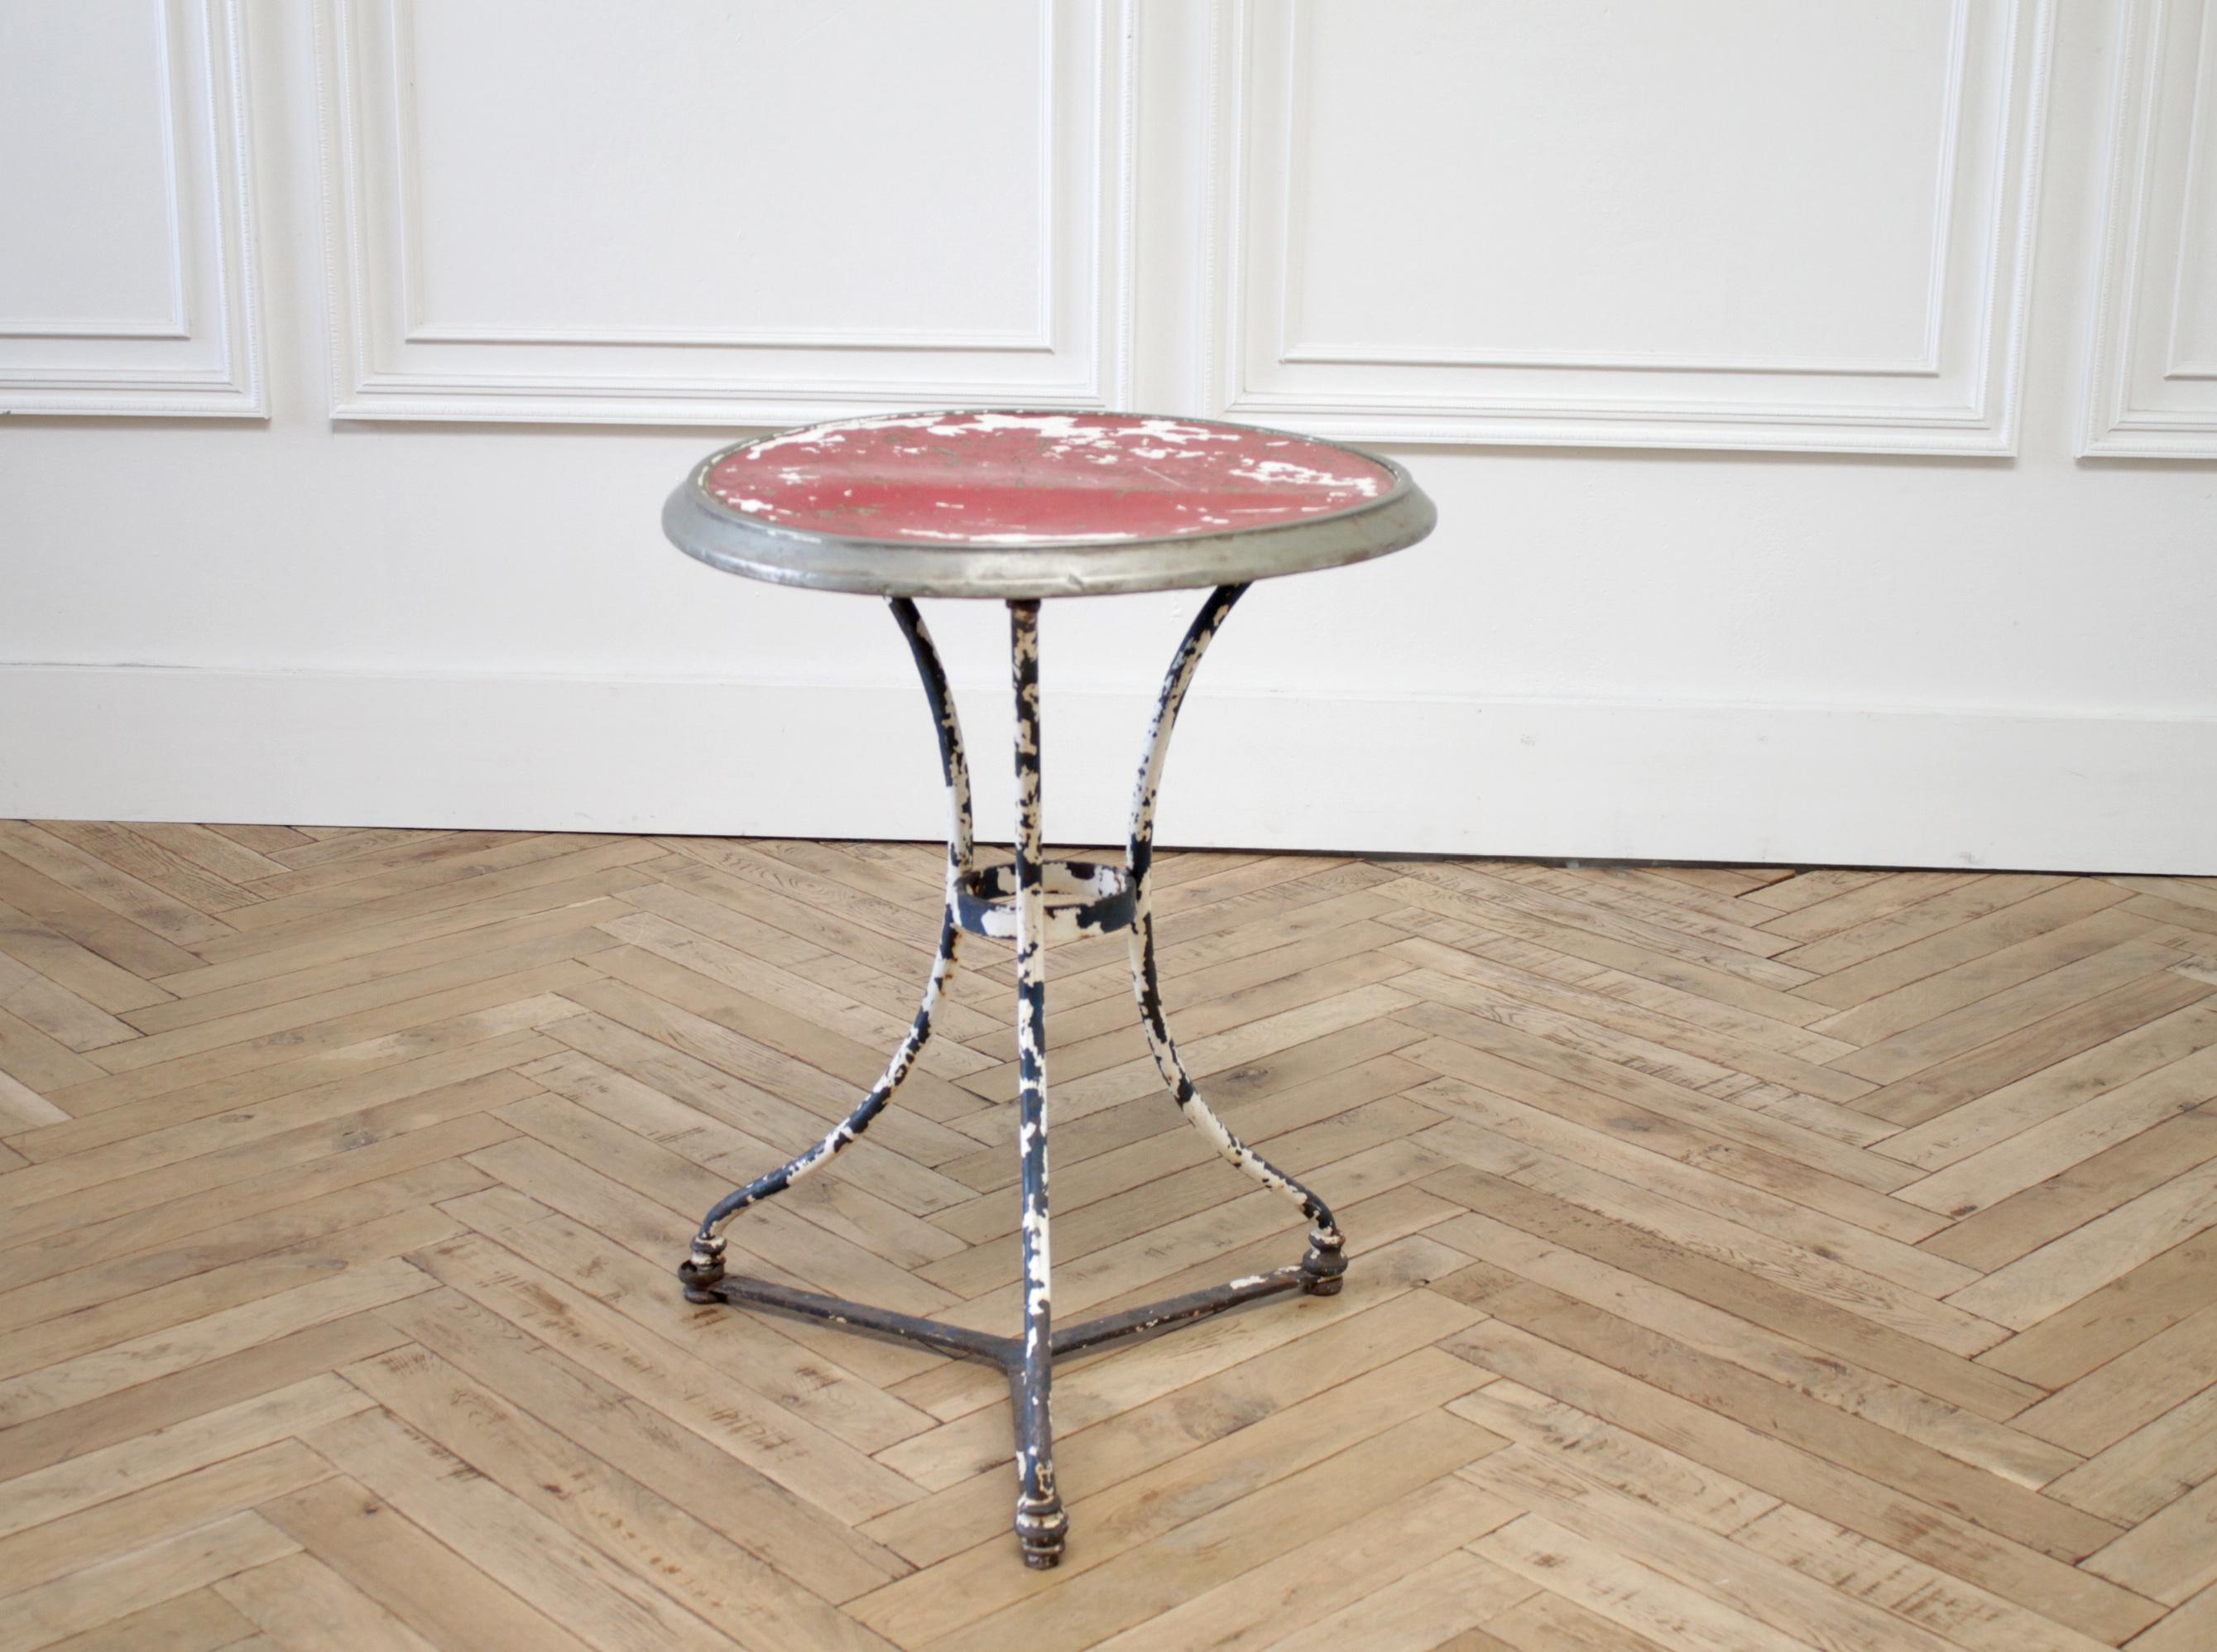 Antique French iron and wood side table
Solid iron table, with wood and metal top. Original painted finish in red, and blue chipping paint. Table is solid and sturdy, tabletop surface is not completely flat, see photos. Still usable for books and